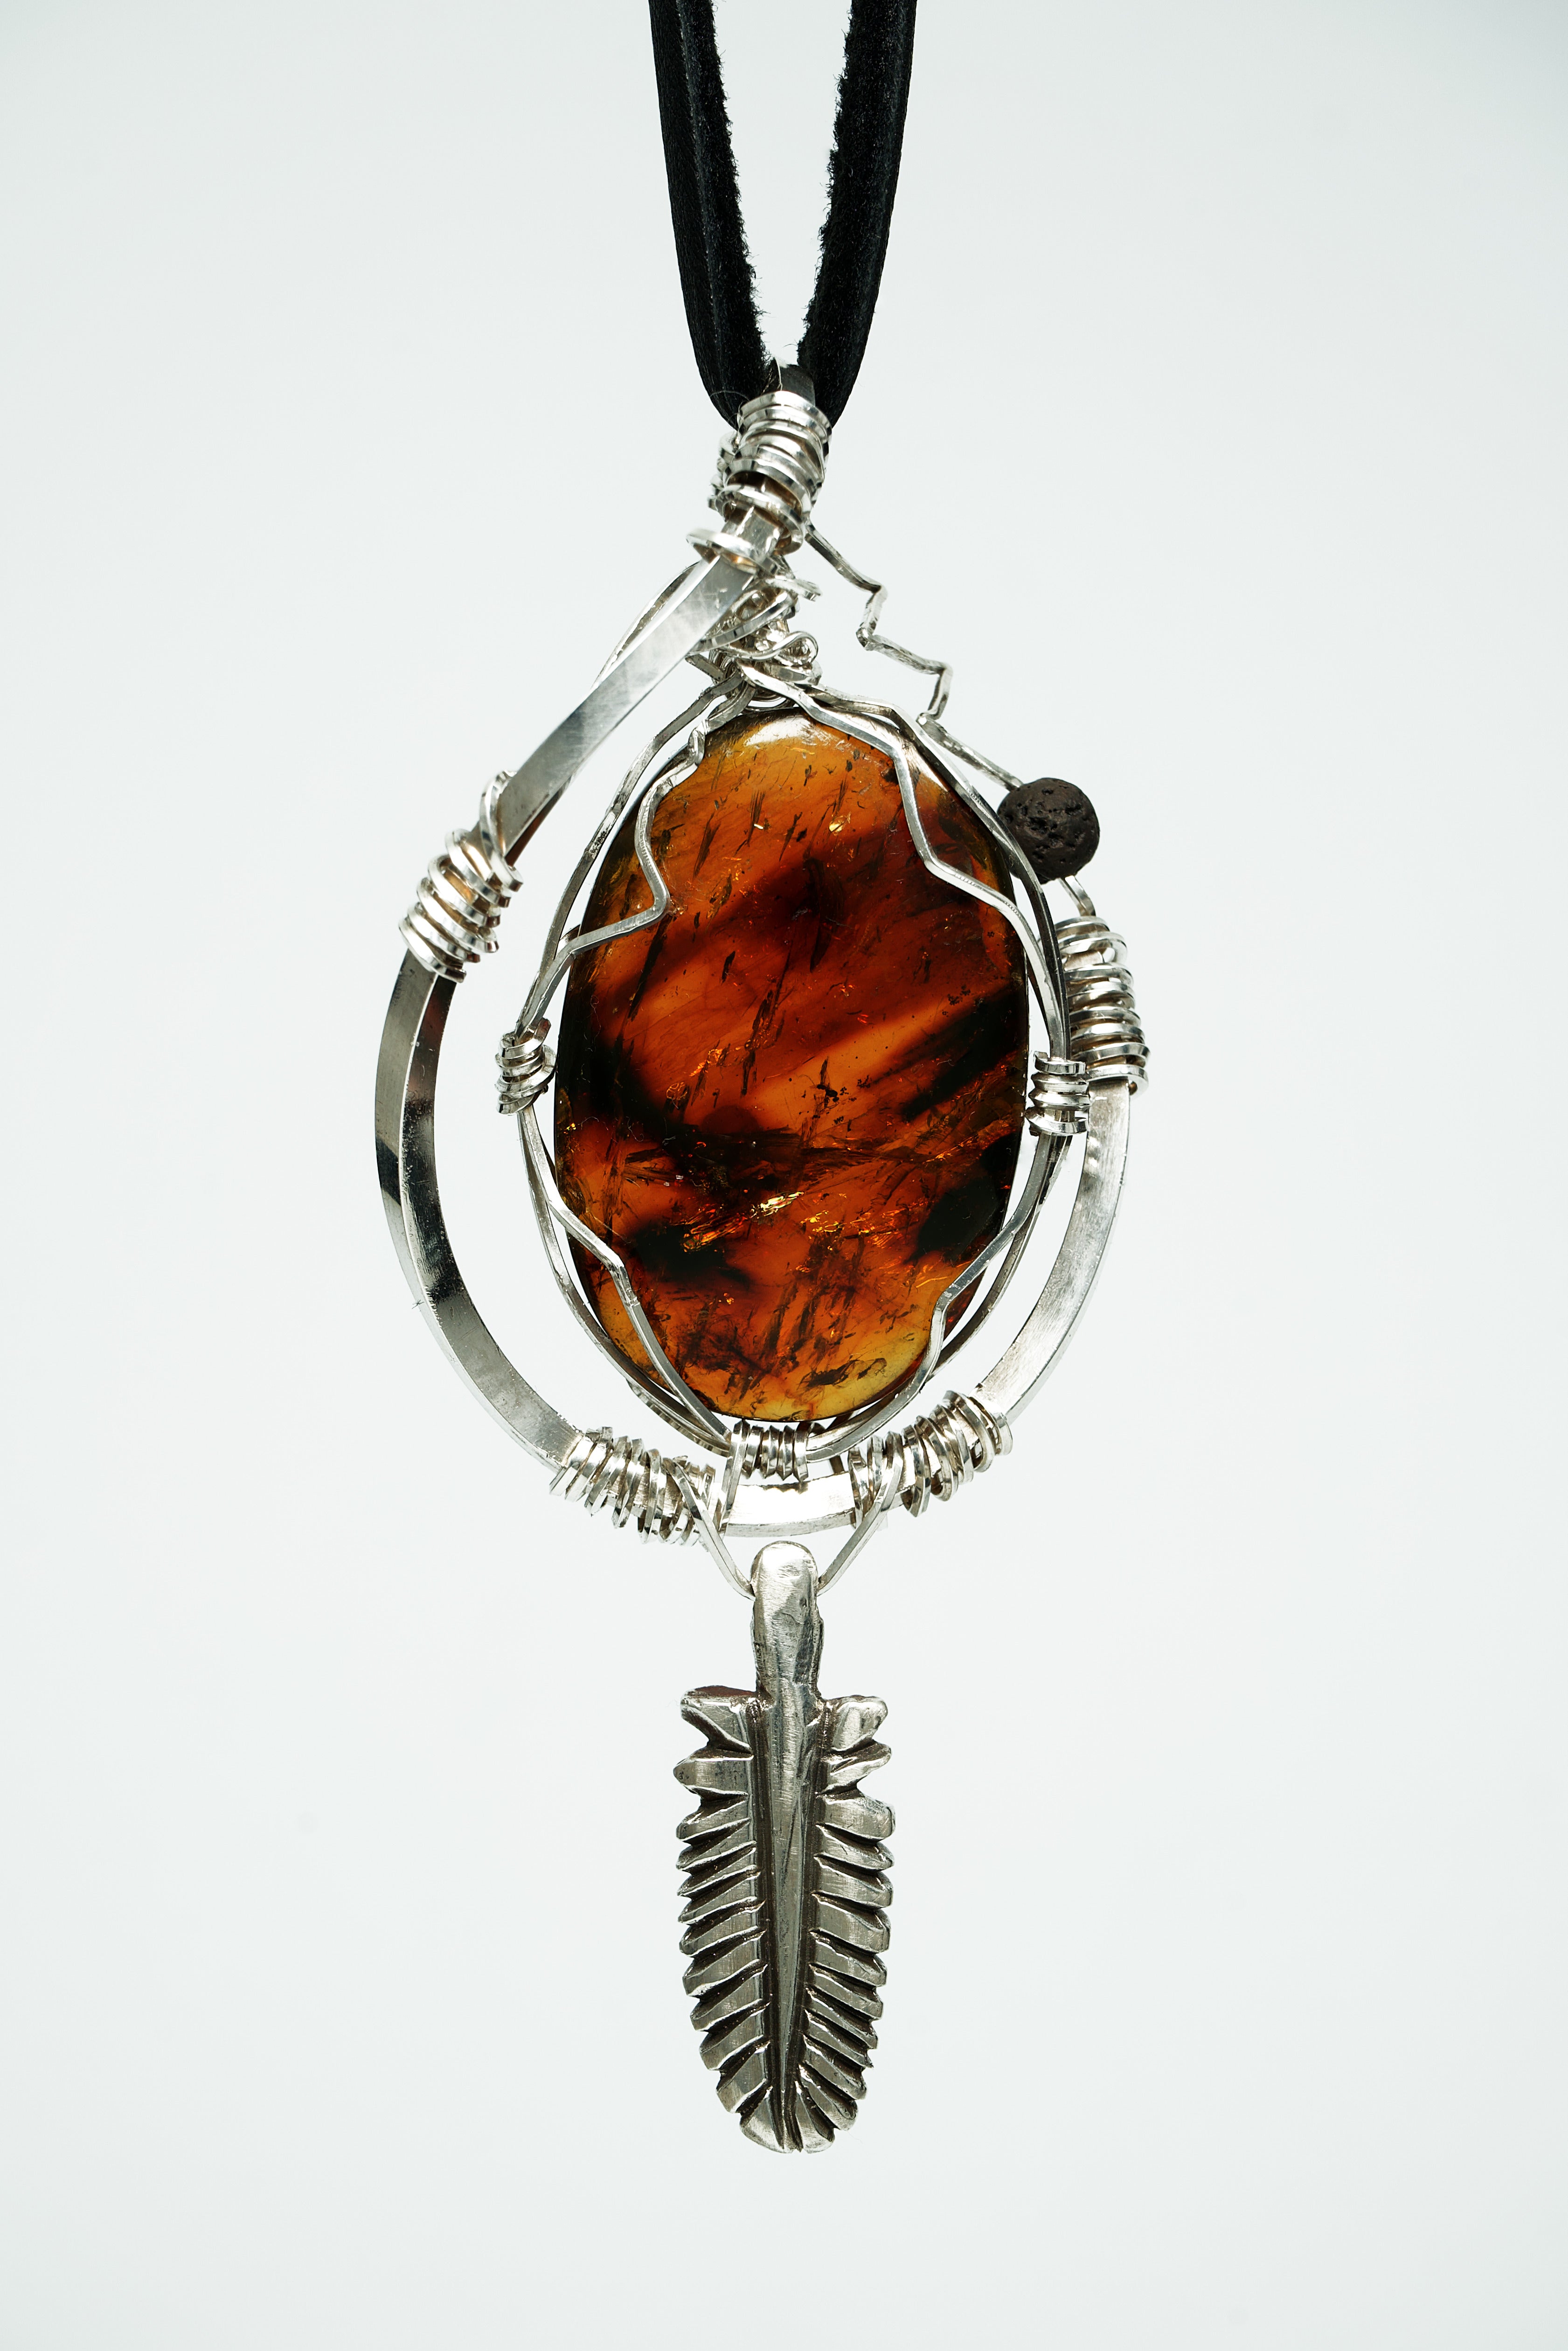 Frozen Time (Amber, Sterling Silver Pendant)